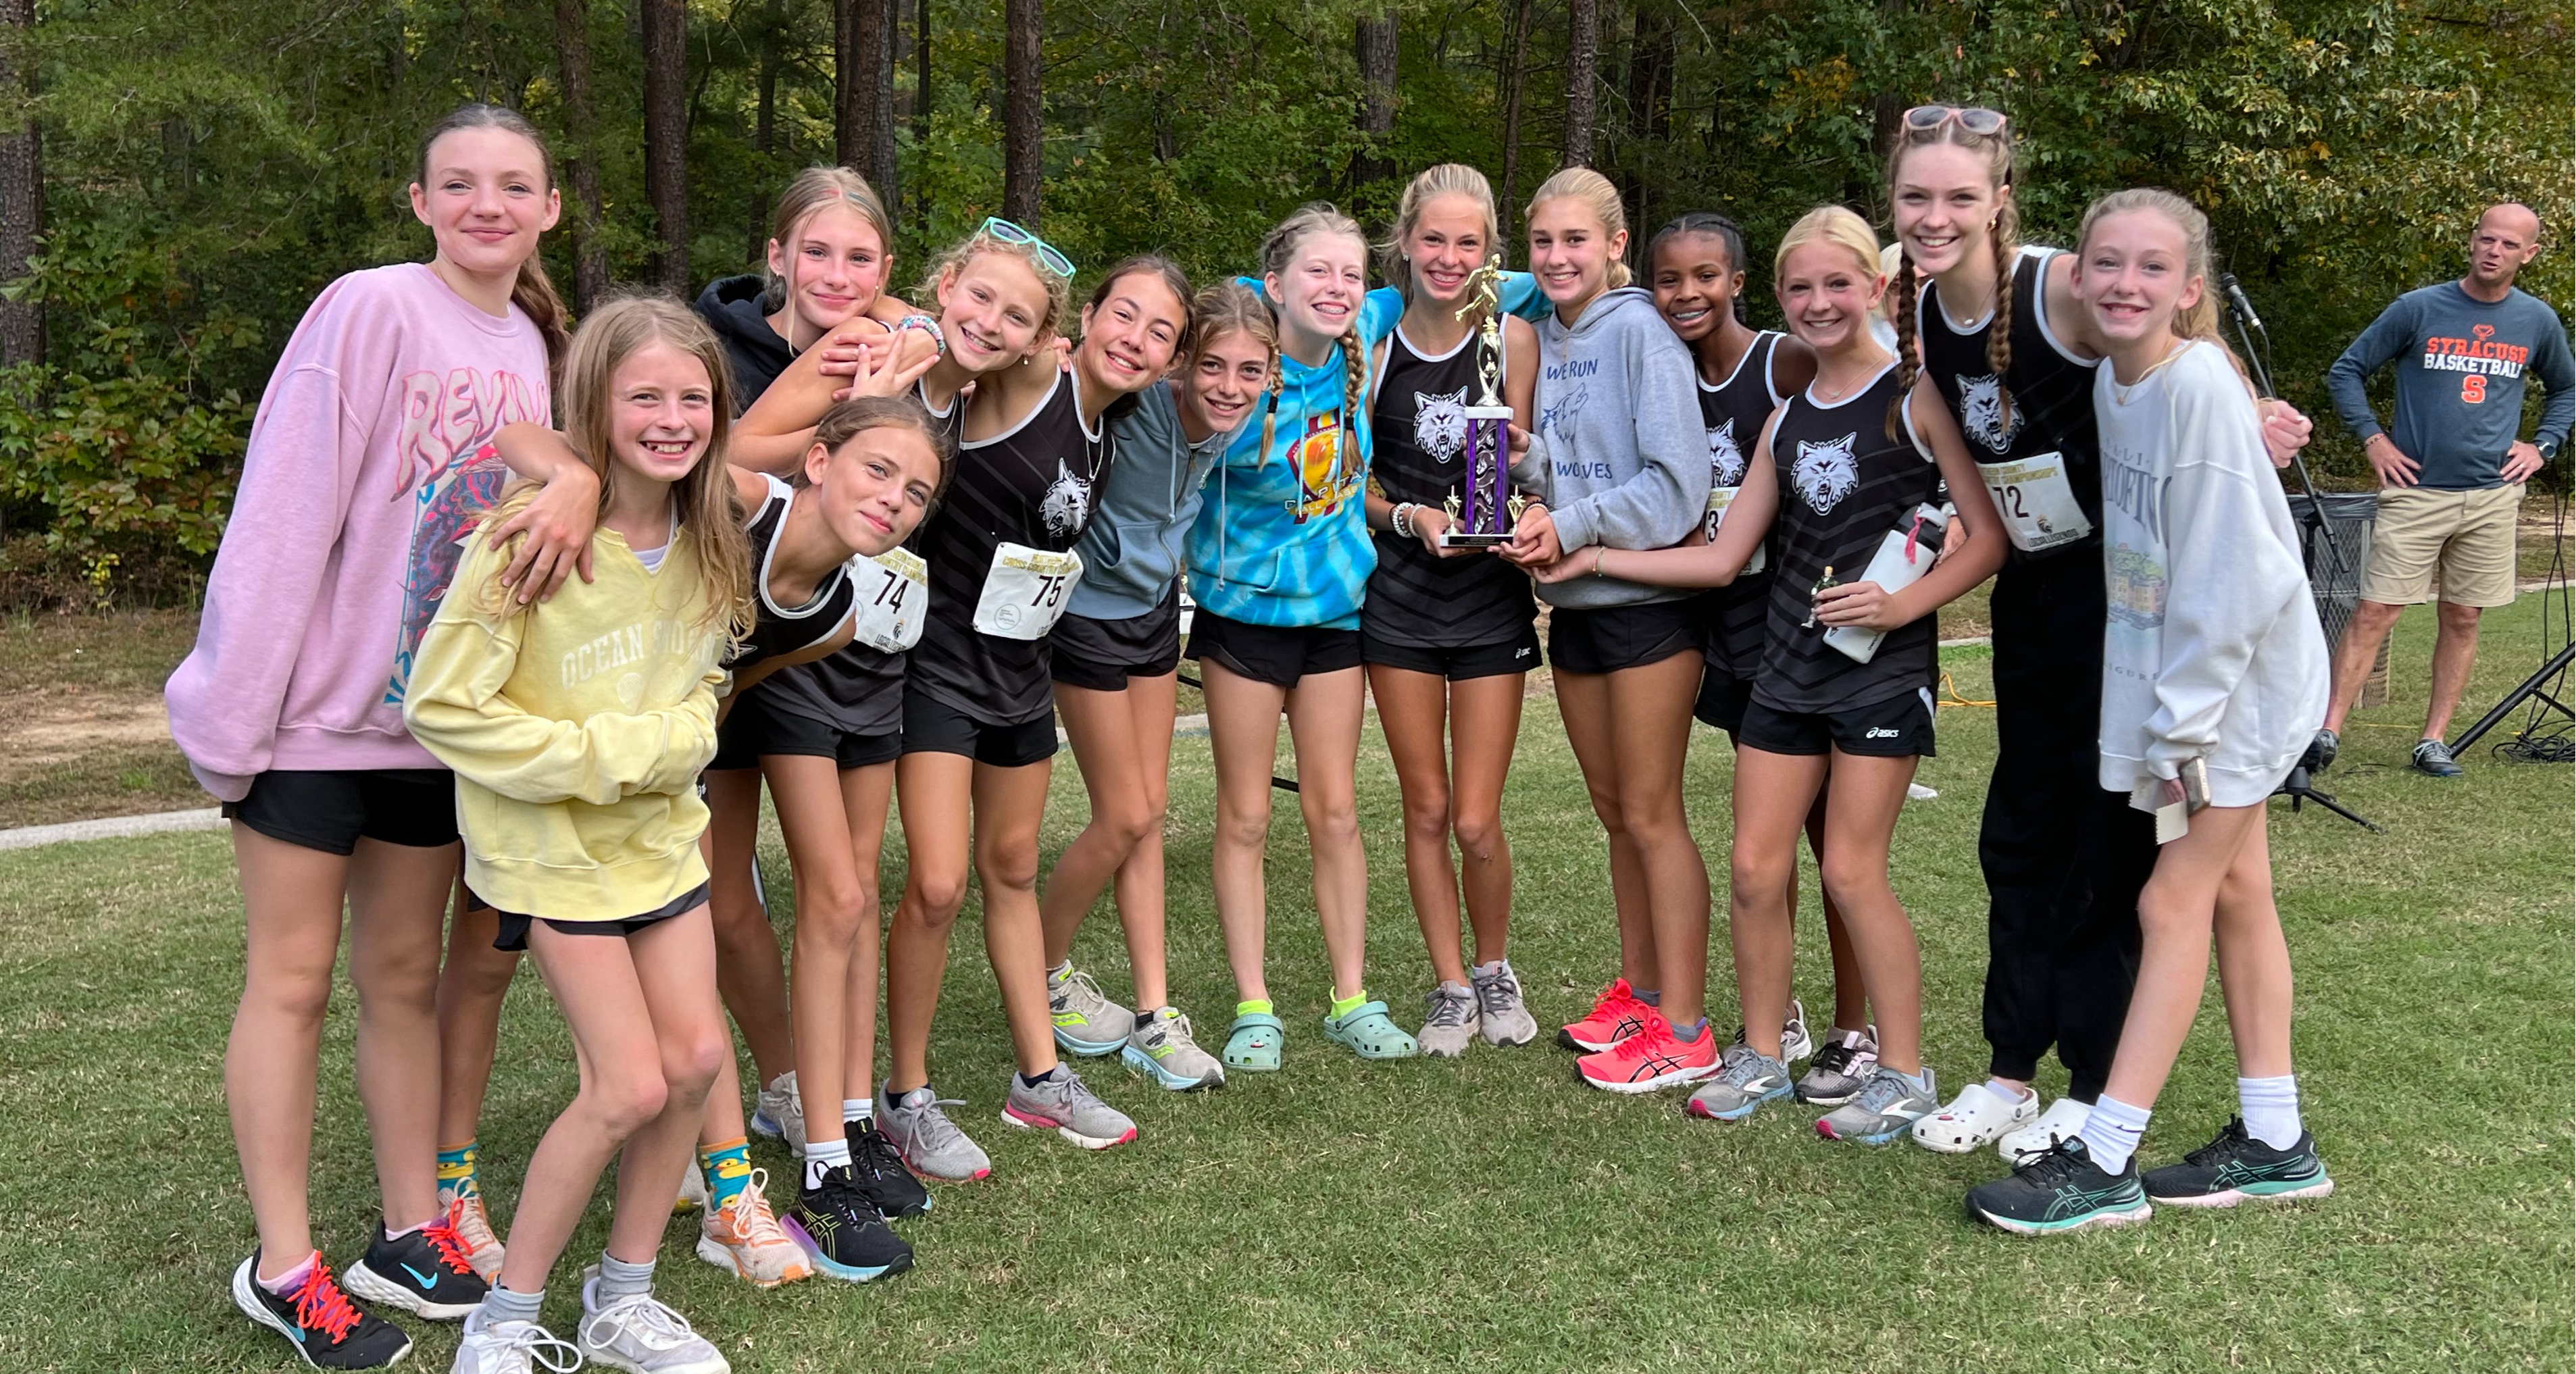 Girls cross country team poses with a trophy